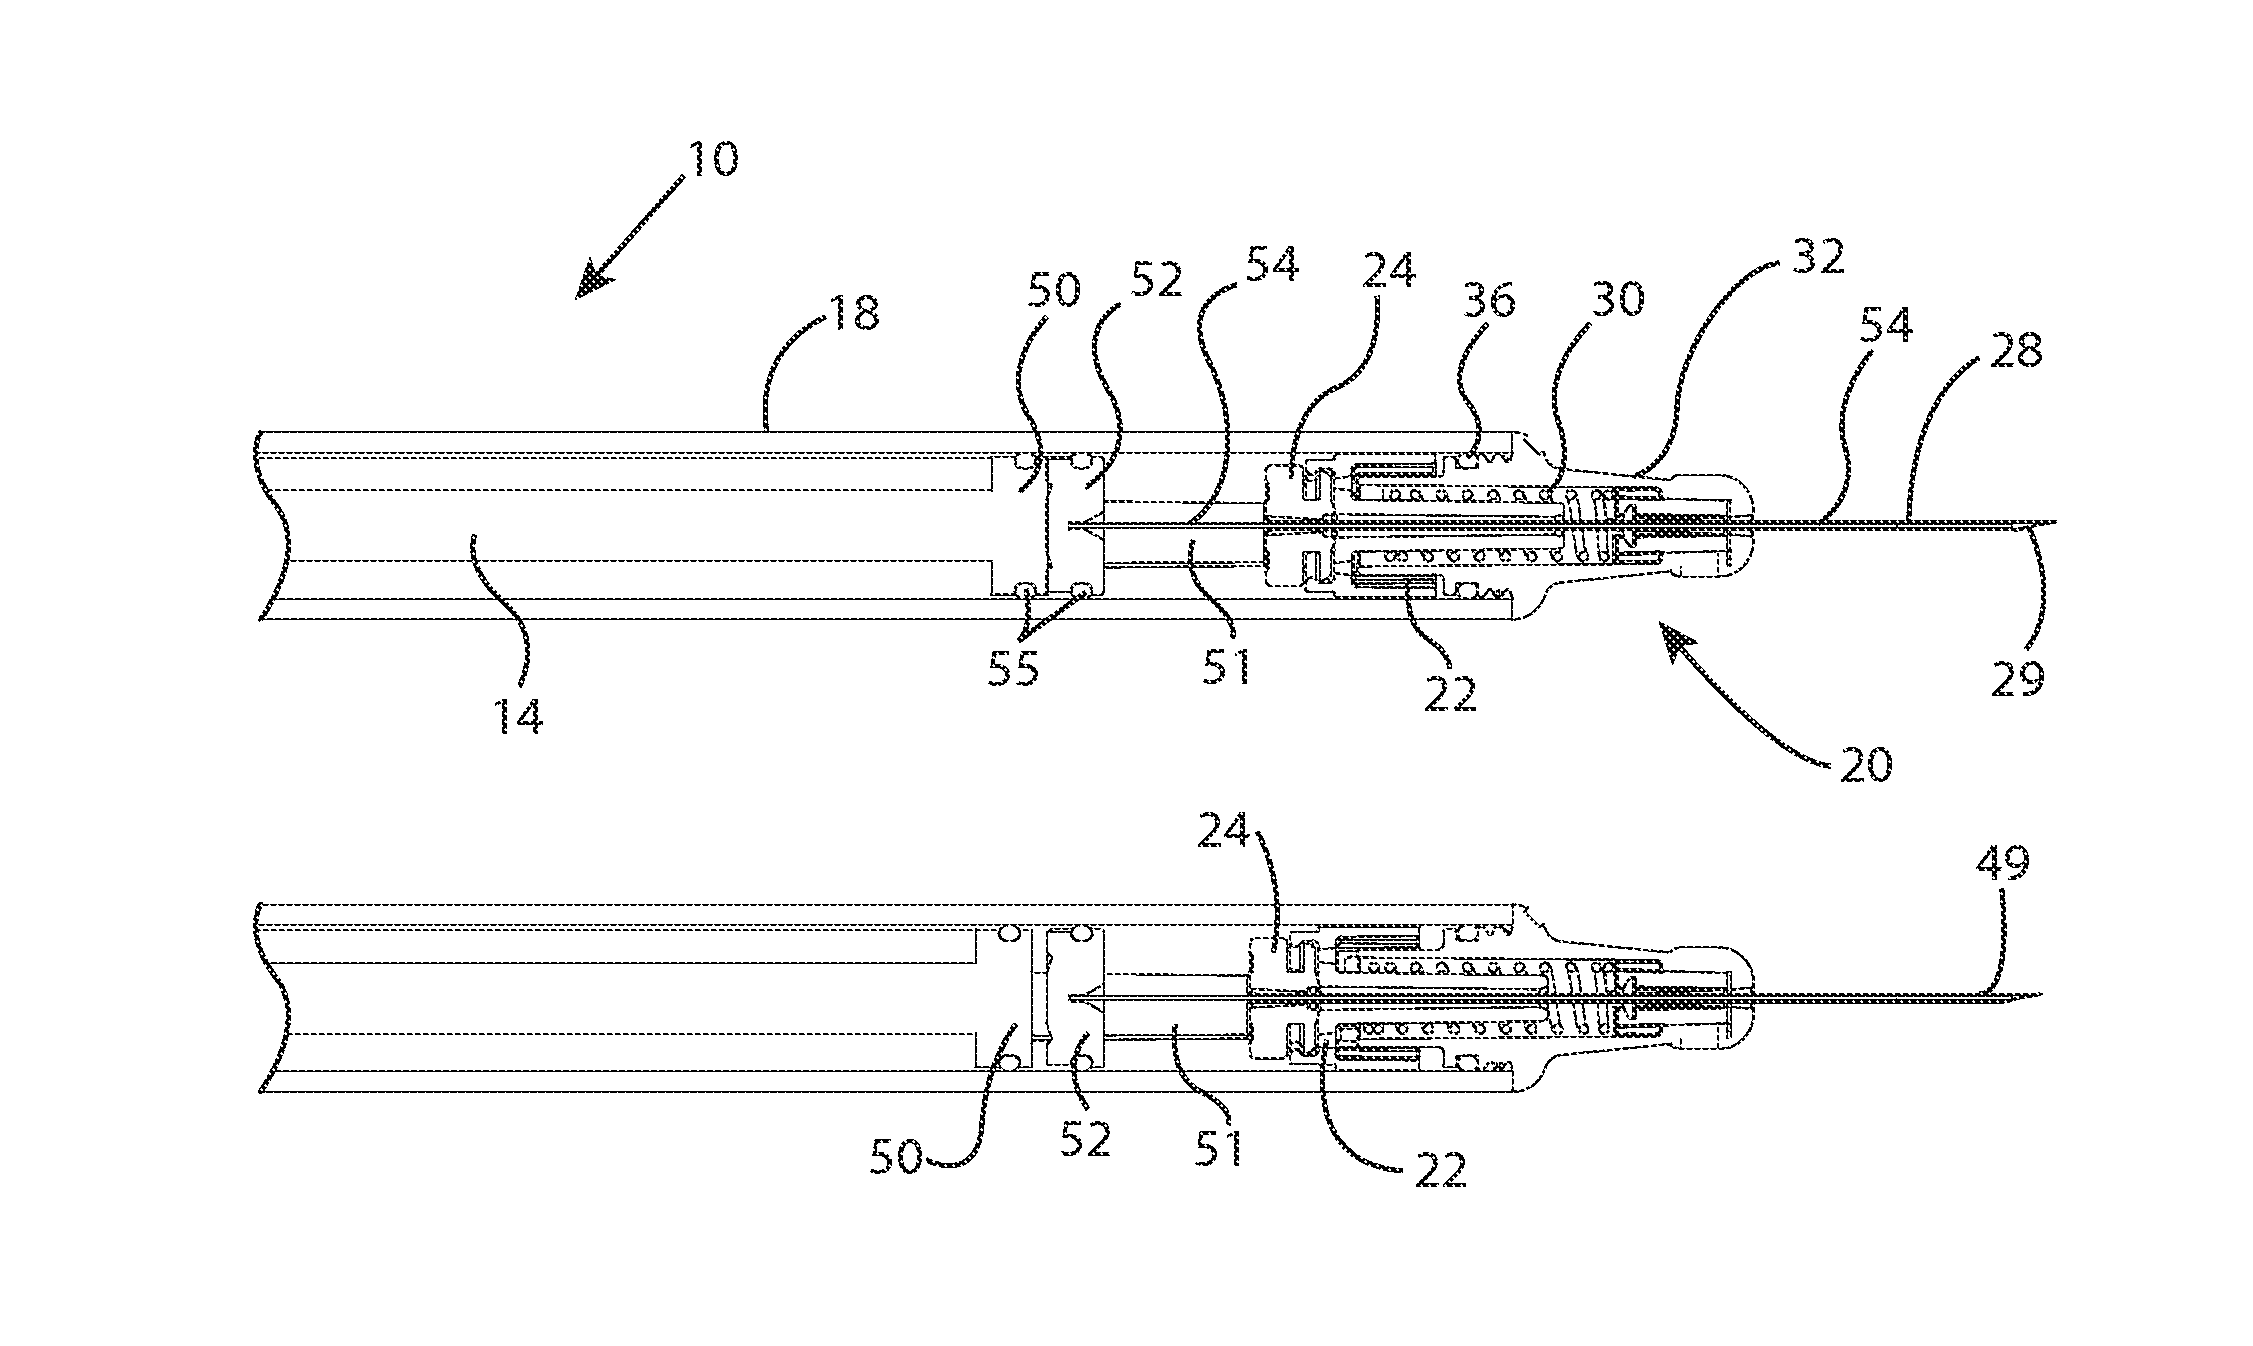 Devices for targeted delivery of therapeutic implants